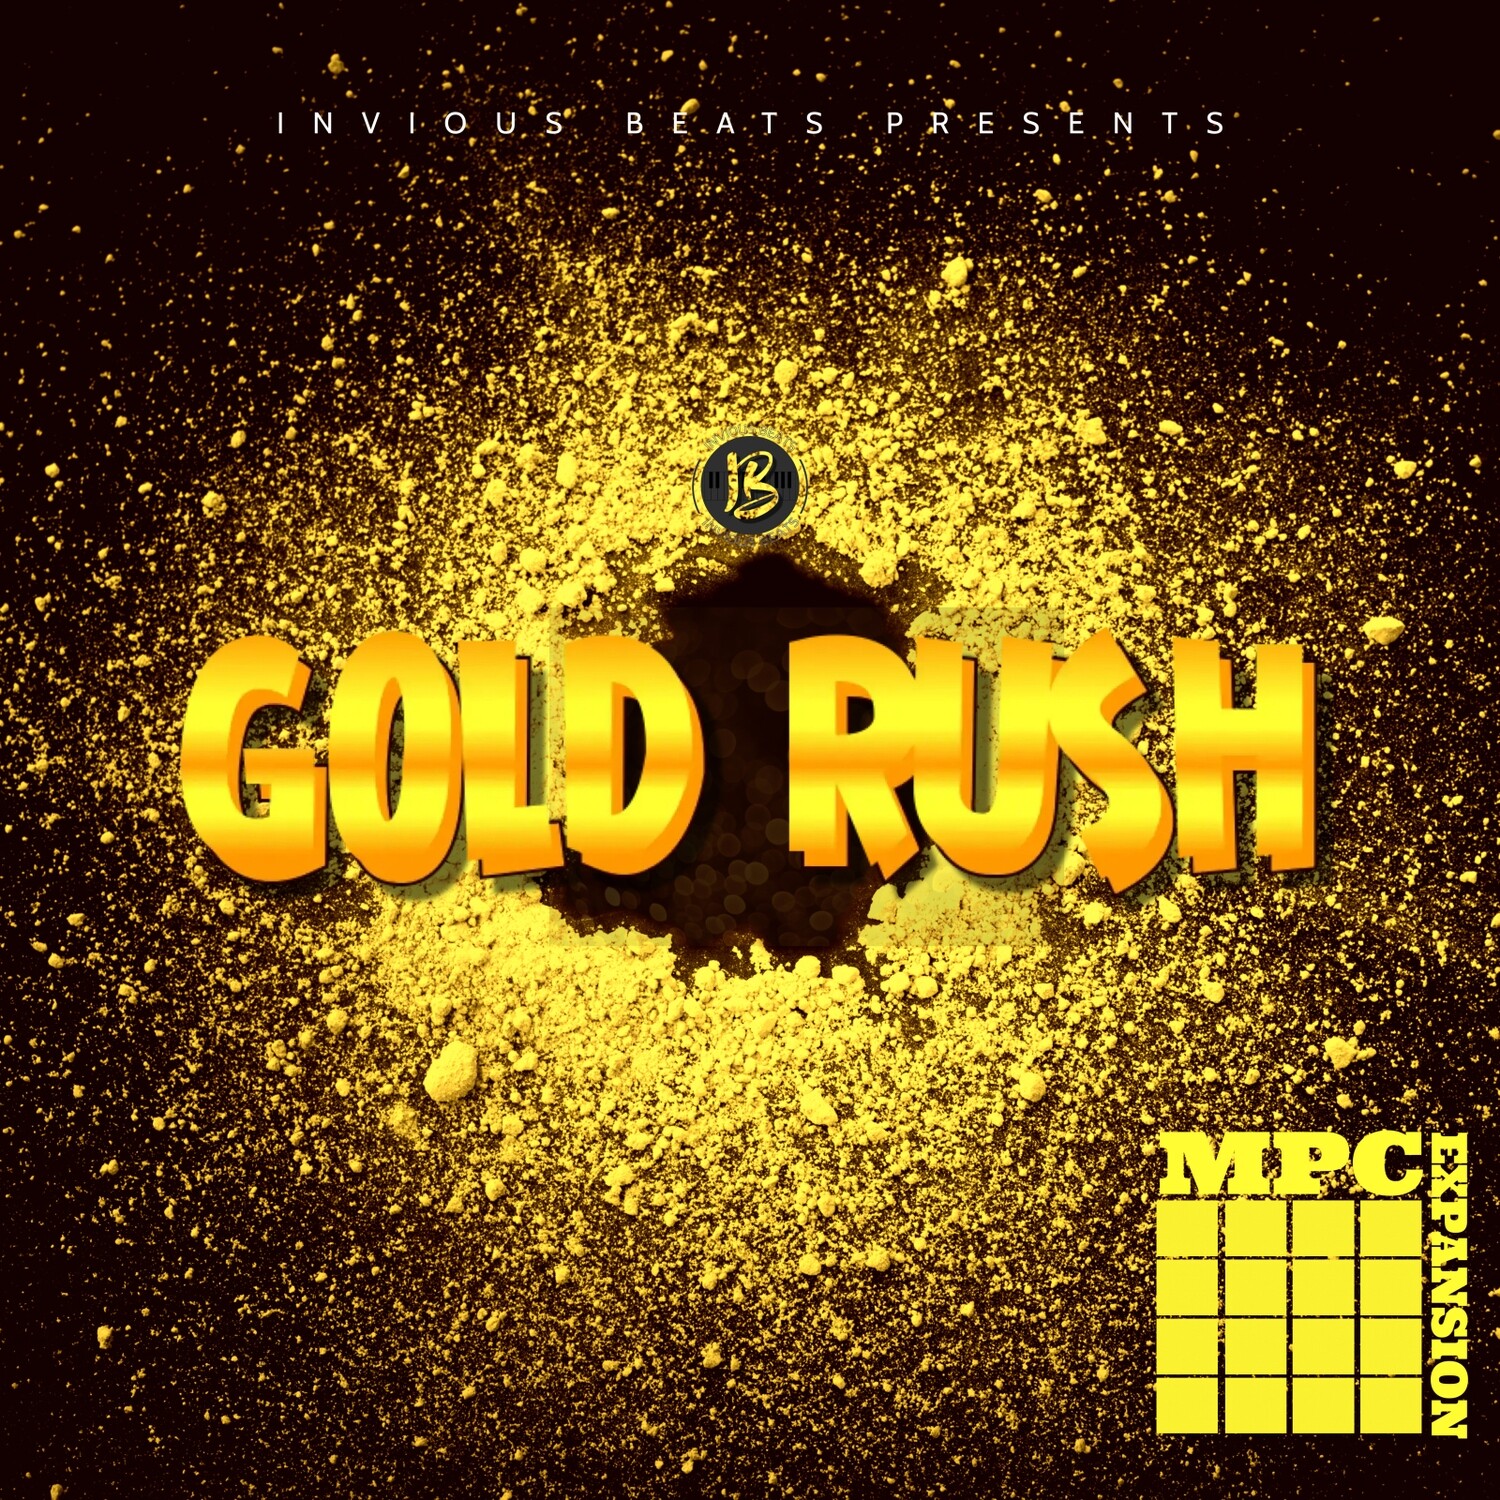 MPC EXPANSION 'GOLD RUSH' by INVIOUS